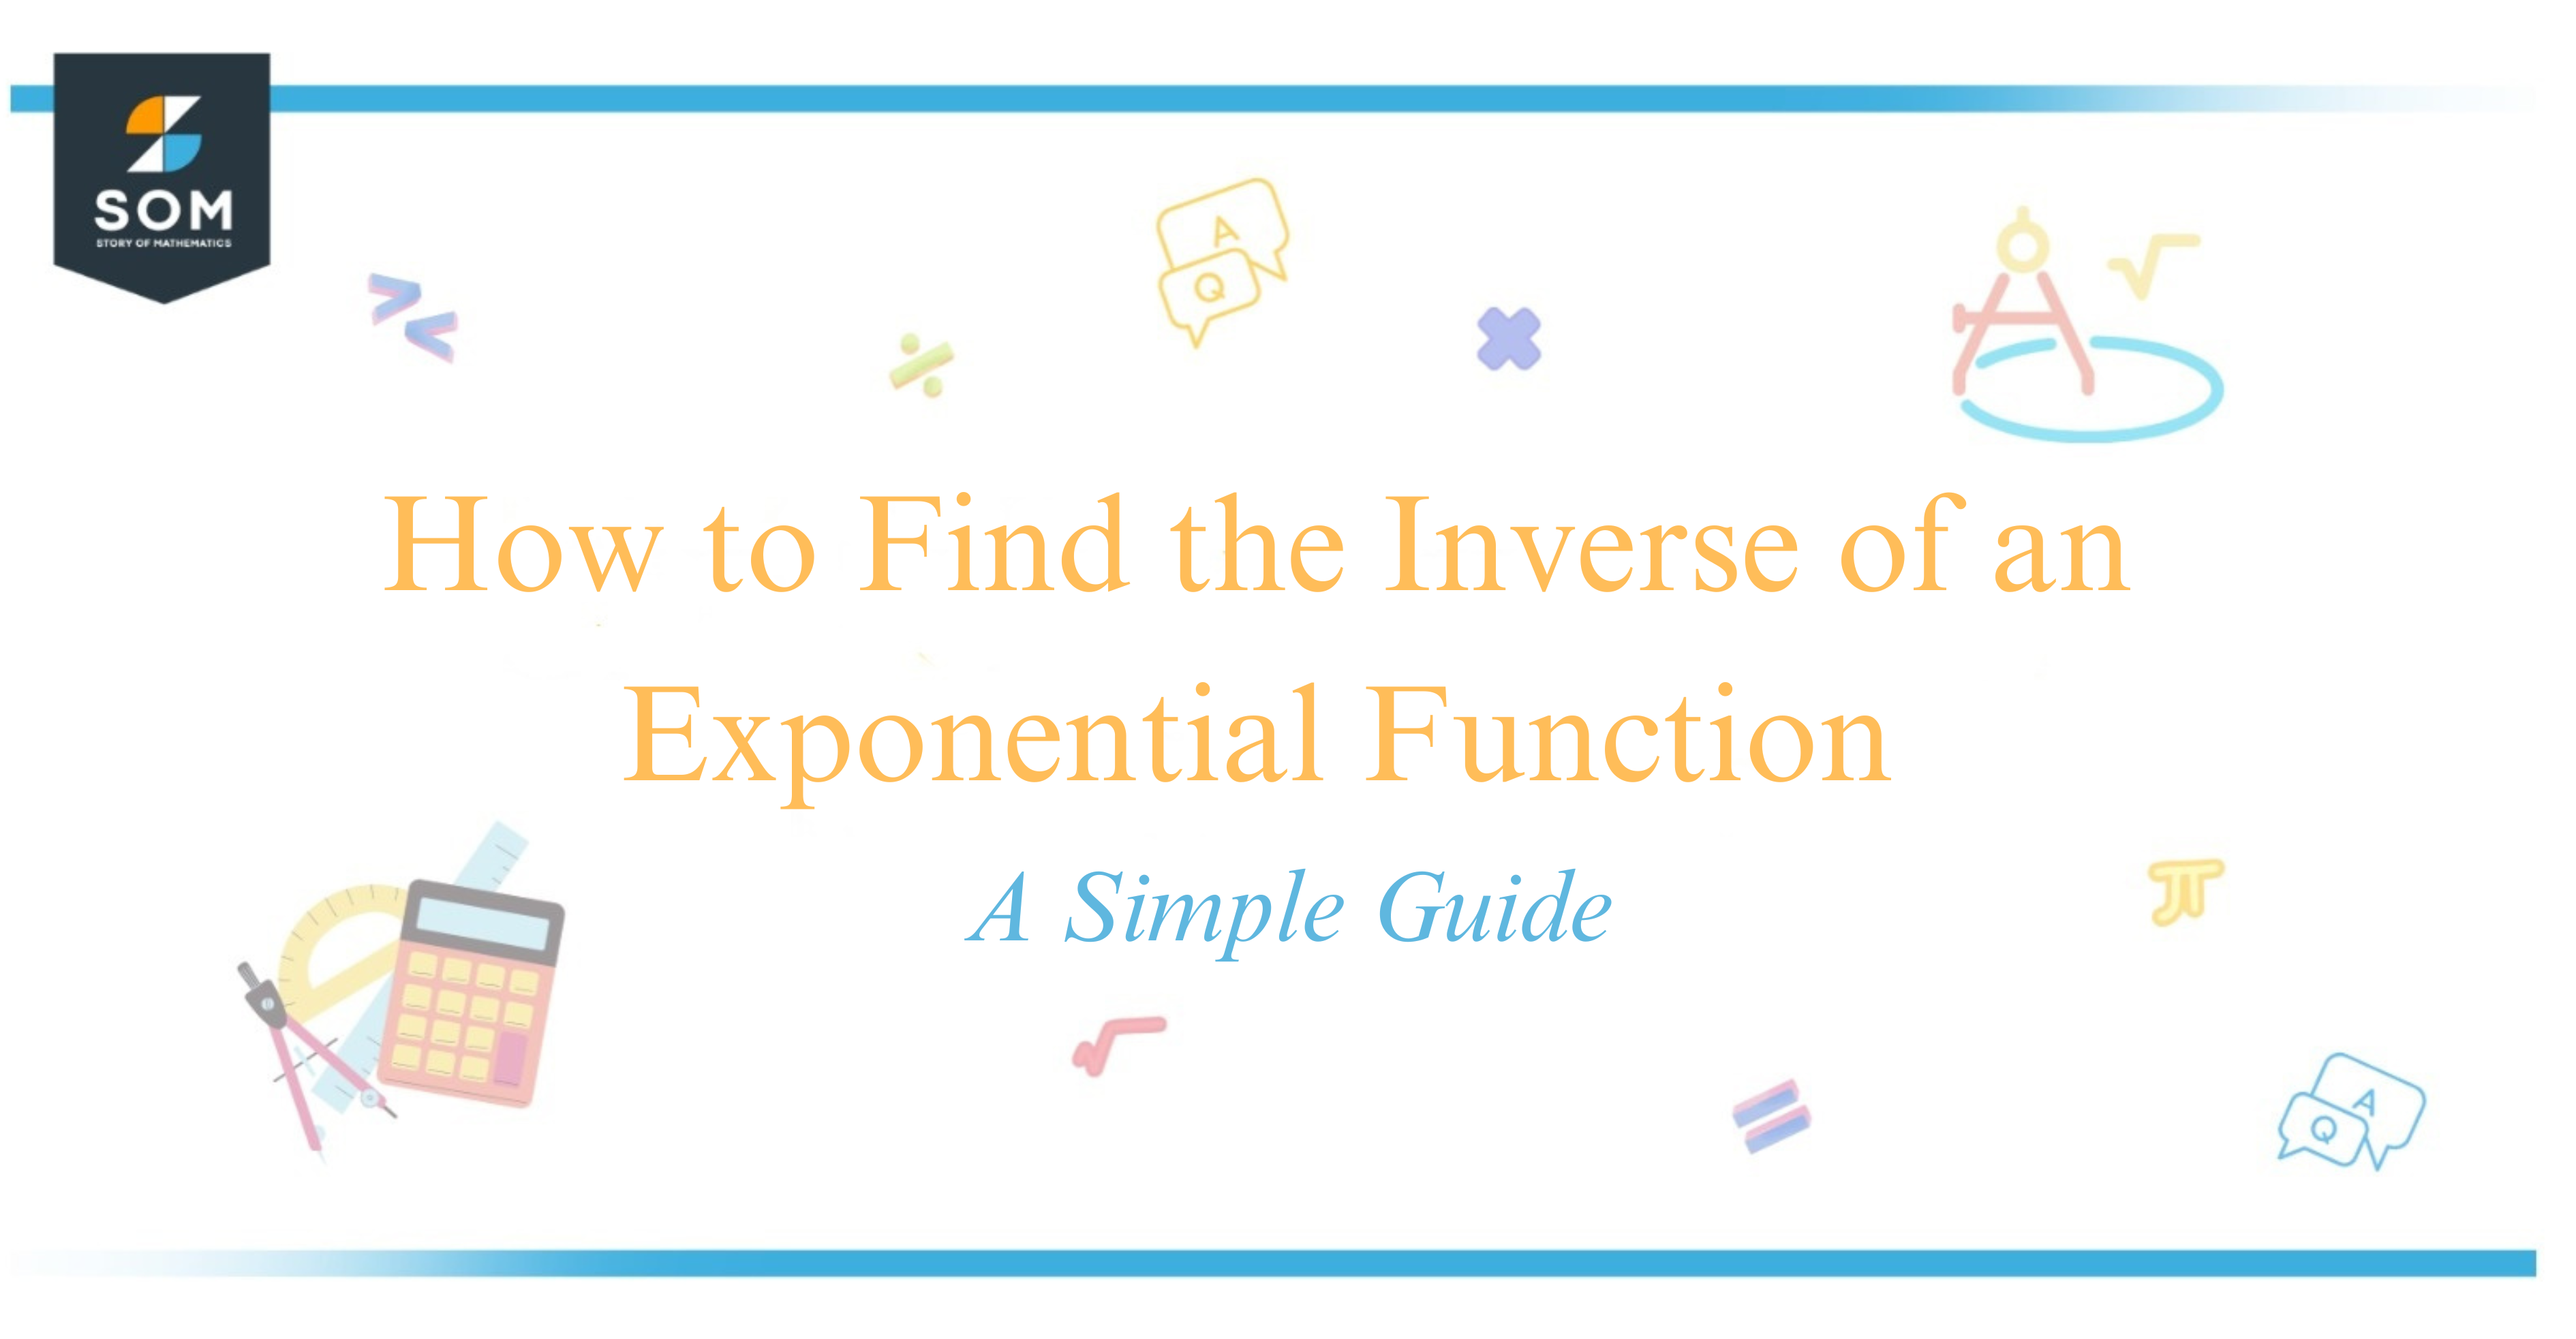 How to Find the Inverse of an Exponential Function A Simple Guide